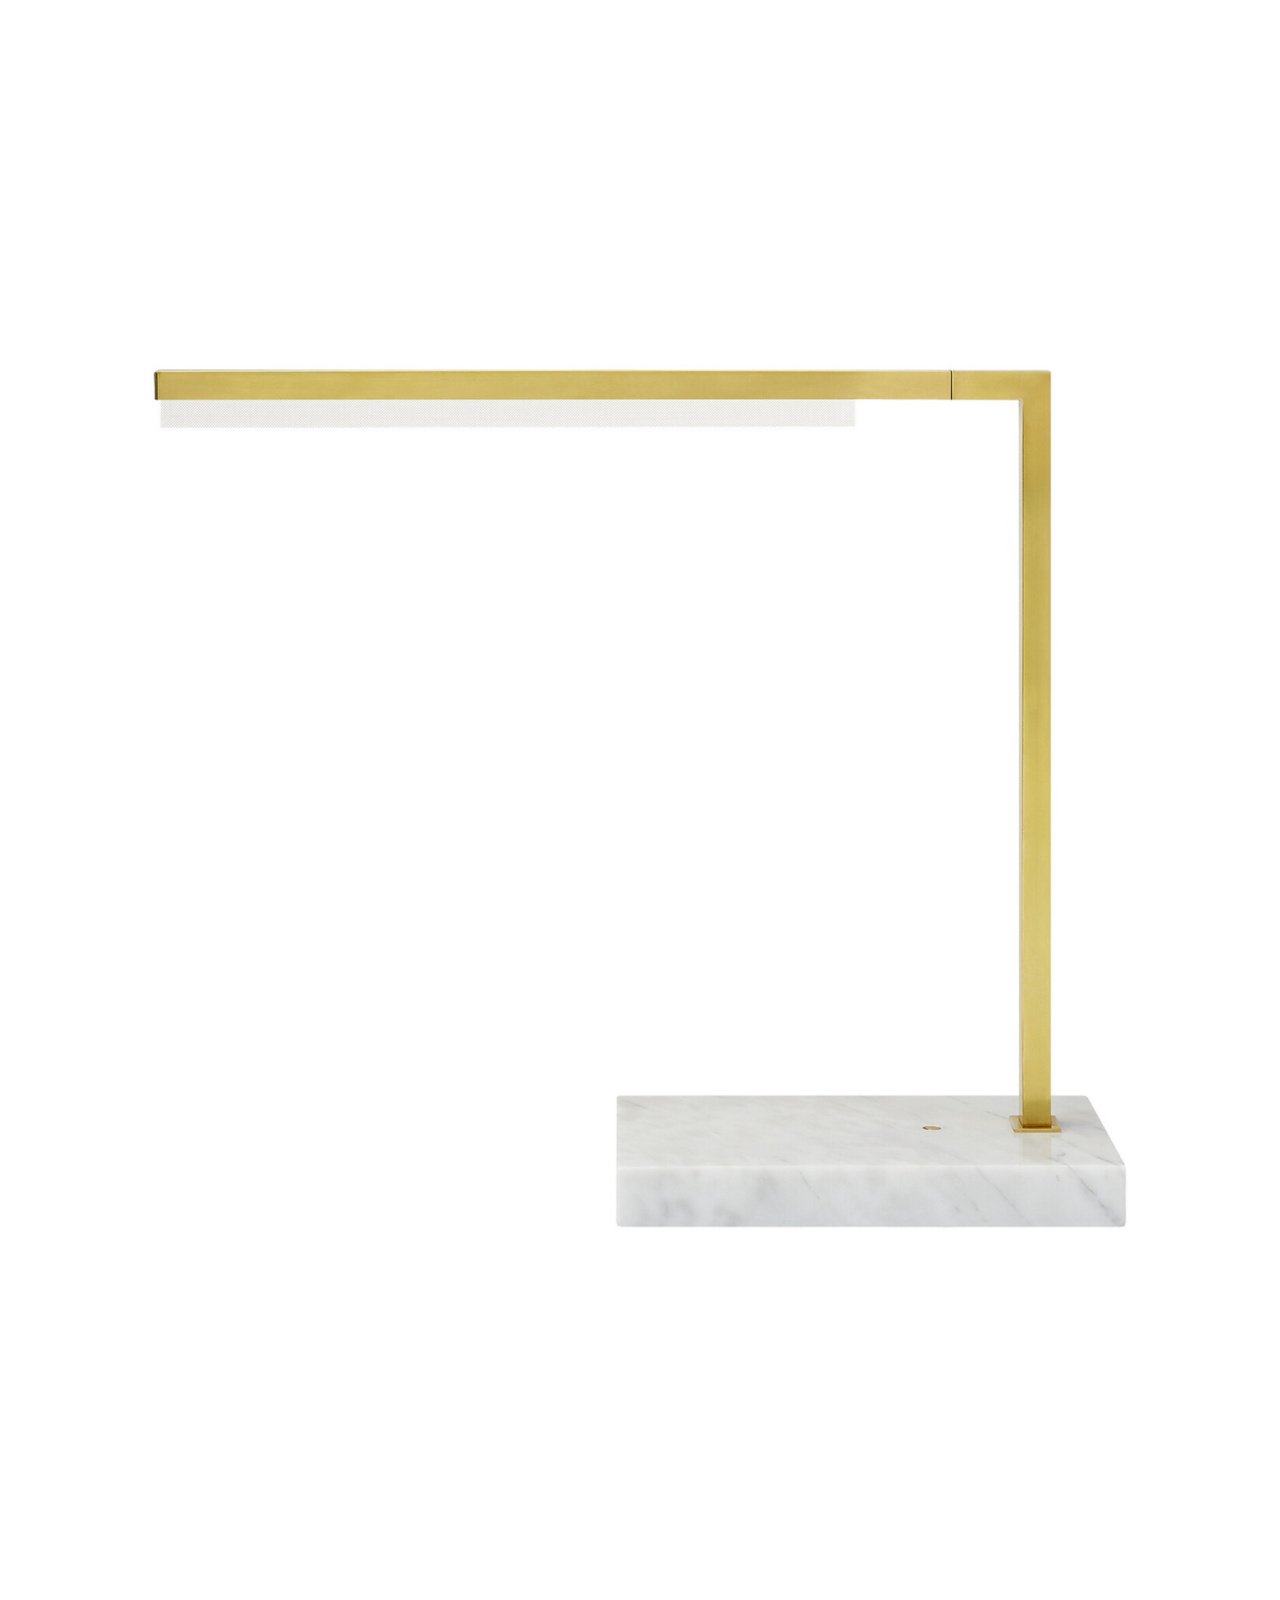 Klee 18" Table Lamp Natural Brass/White